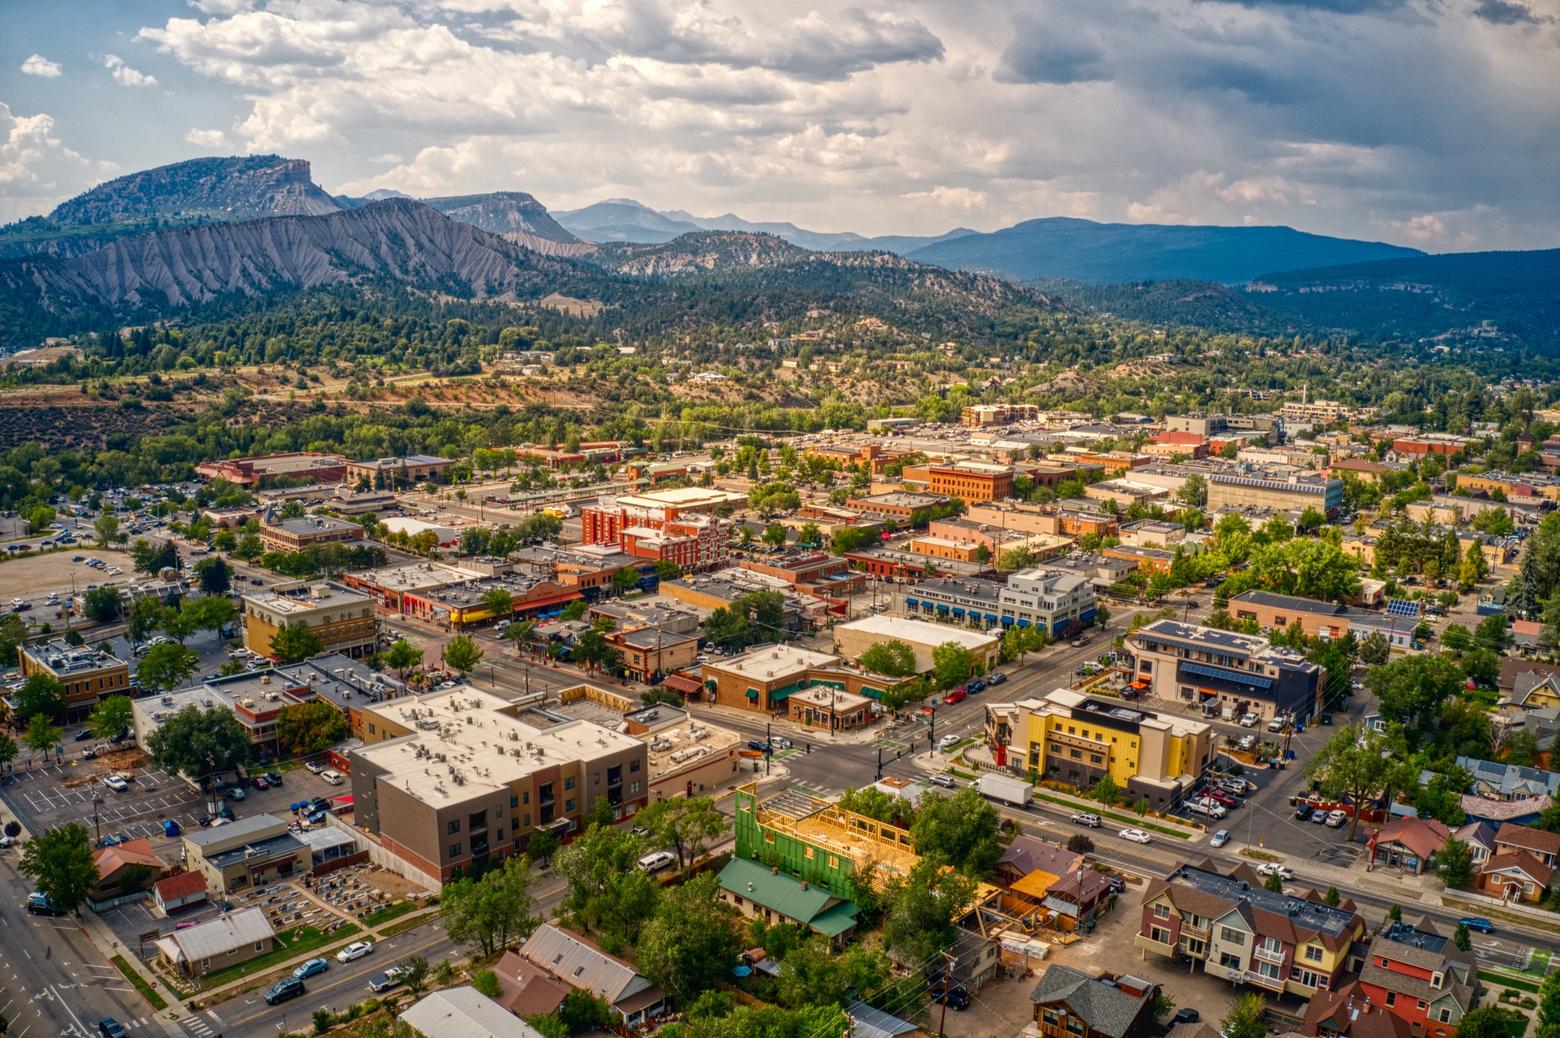 Durango is typical of a lot of mountain towns where people with means and leisure time want to be. But what happens to community when only the rich can afford to live there? It's a question affecting towns in Greater Yellowstone, too.  Aerial photo of Durango by Jacob Boomsma/Shutterstock ID 1853645695